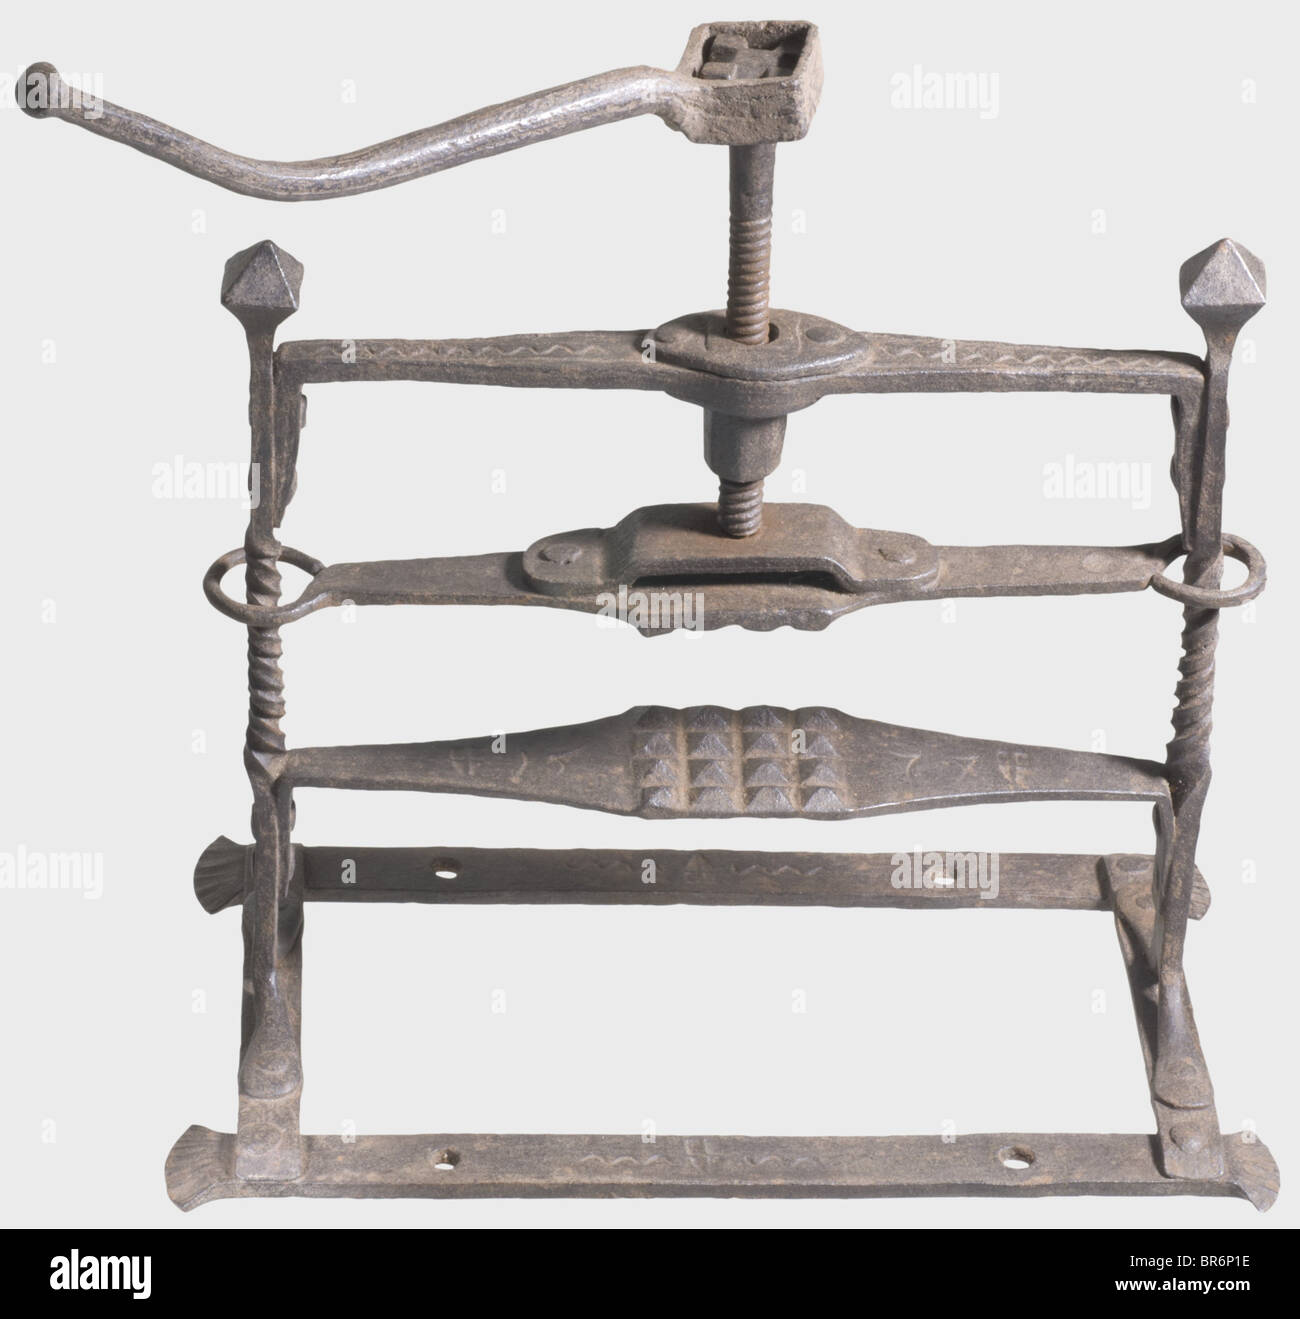 A hand crusher, Vienna(?), dated 1577. Wrought-iron construction, central threaded rod with detachable crank and moveable press. Twisted side bars with cubic finials. Dated on the hand support. Struck several times with the Vienna arsenal mark and ornated with sinuous lines and geometrical notch decorations. Signs of age. Width 48 cm, height 49 cm. historic, historical, 16th century, instrument of torture, torture device, instruments of torture, torture devices, object, objects, stills, clipping, clippings, cut out, cut-out, cut-outs, Stock Photo